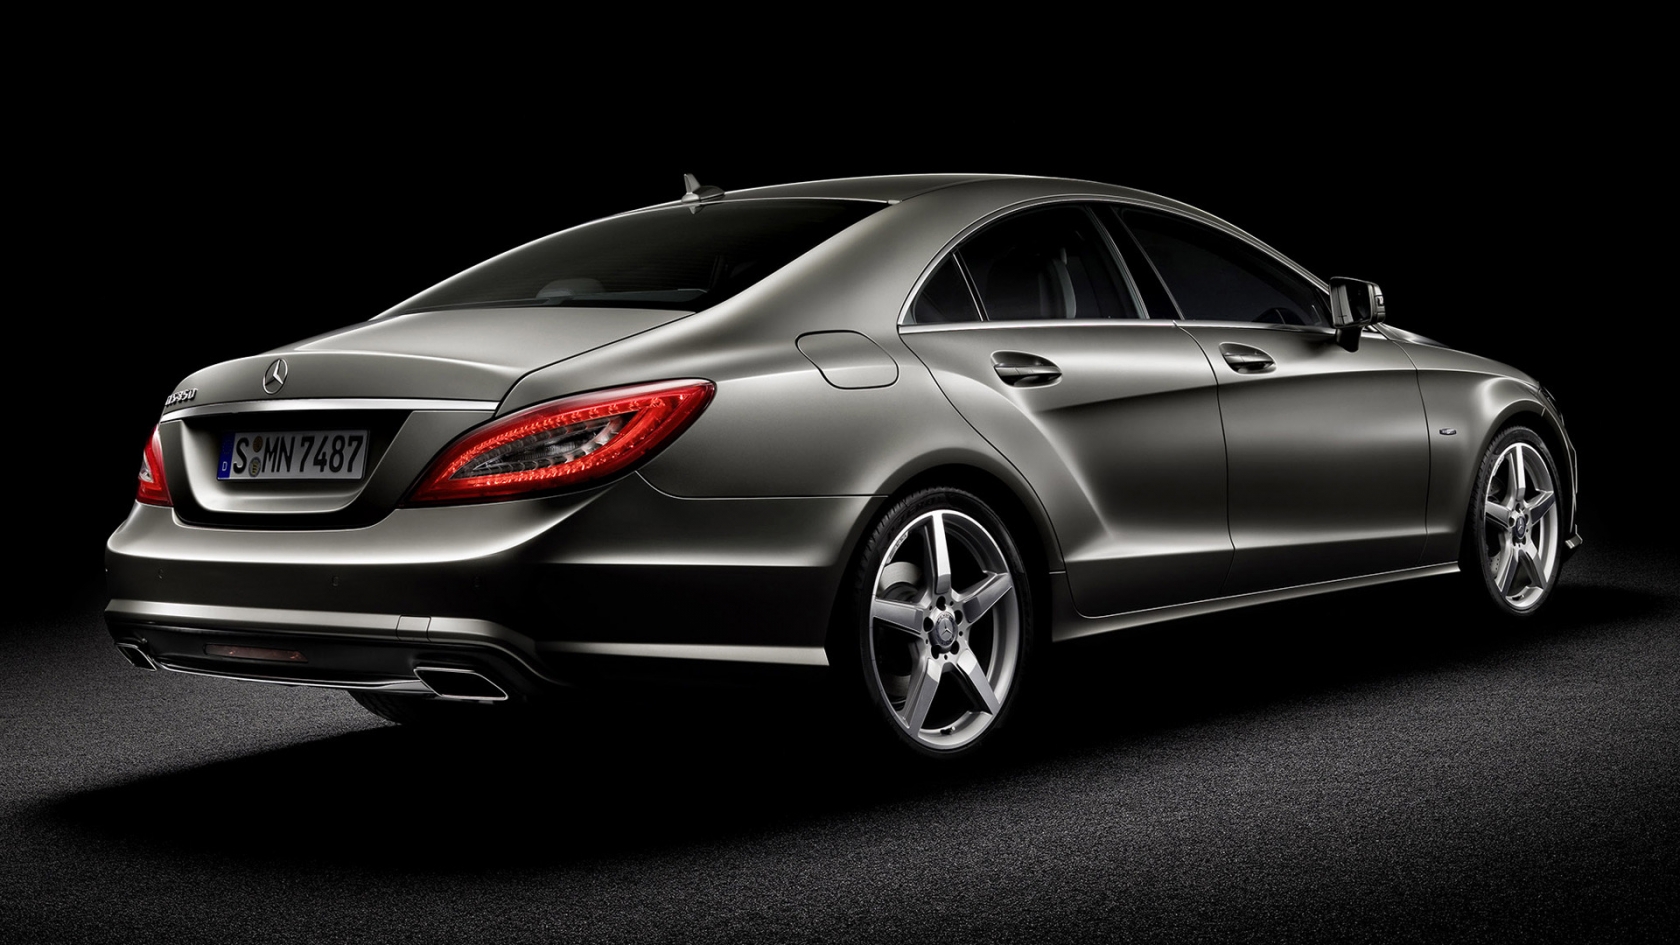 Mercedes CLS 2010 Rear for 1680 x 945 HDTV resolution